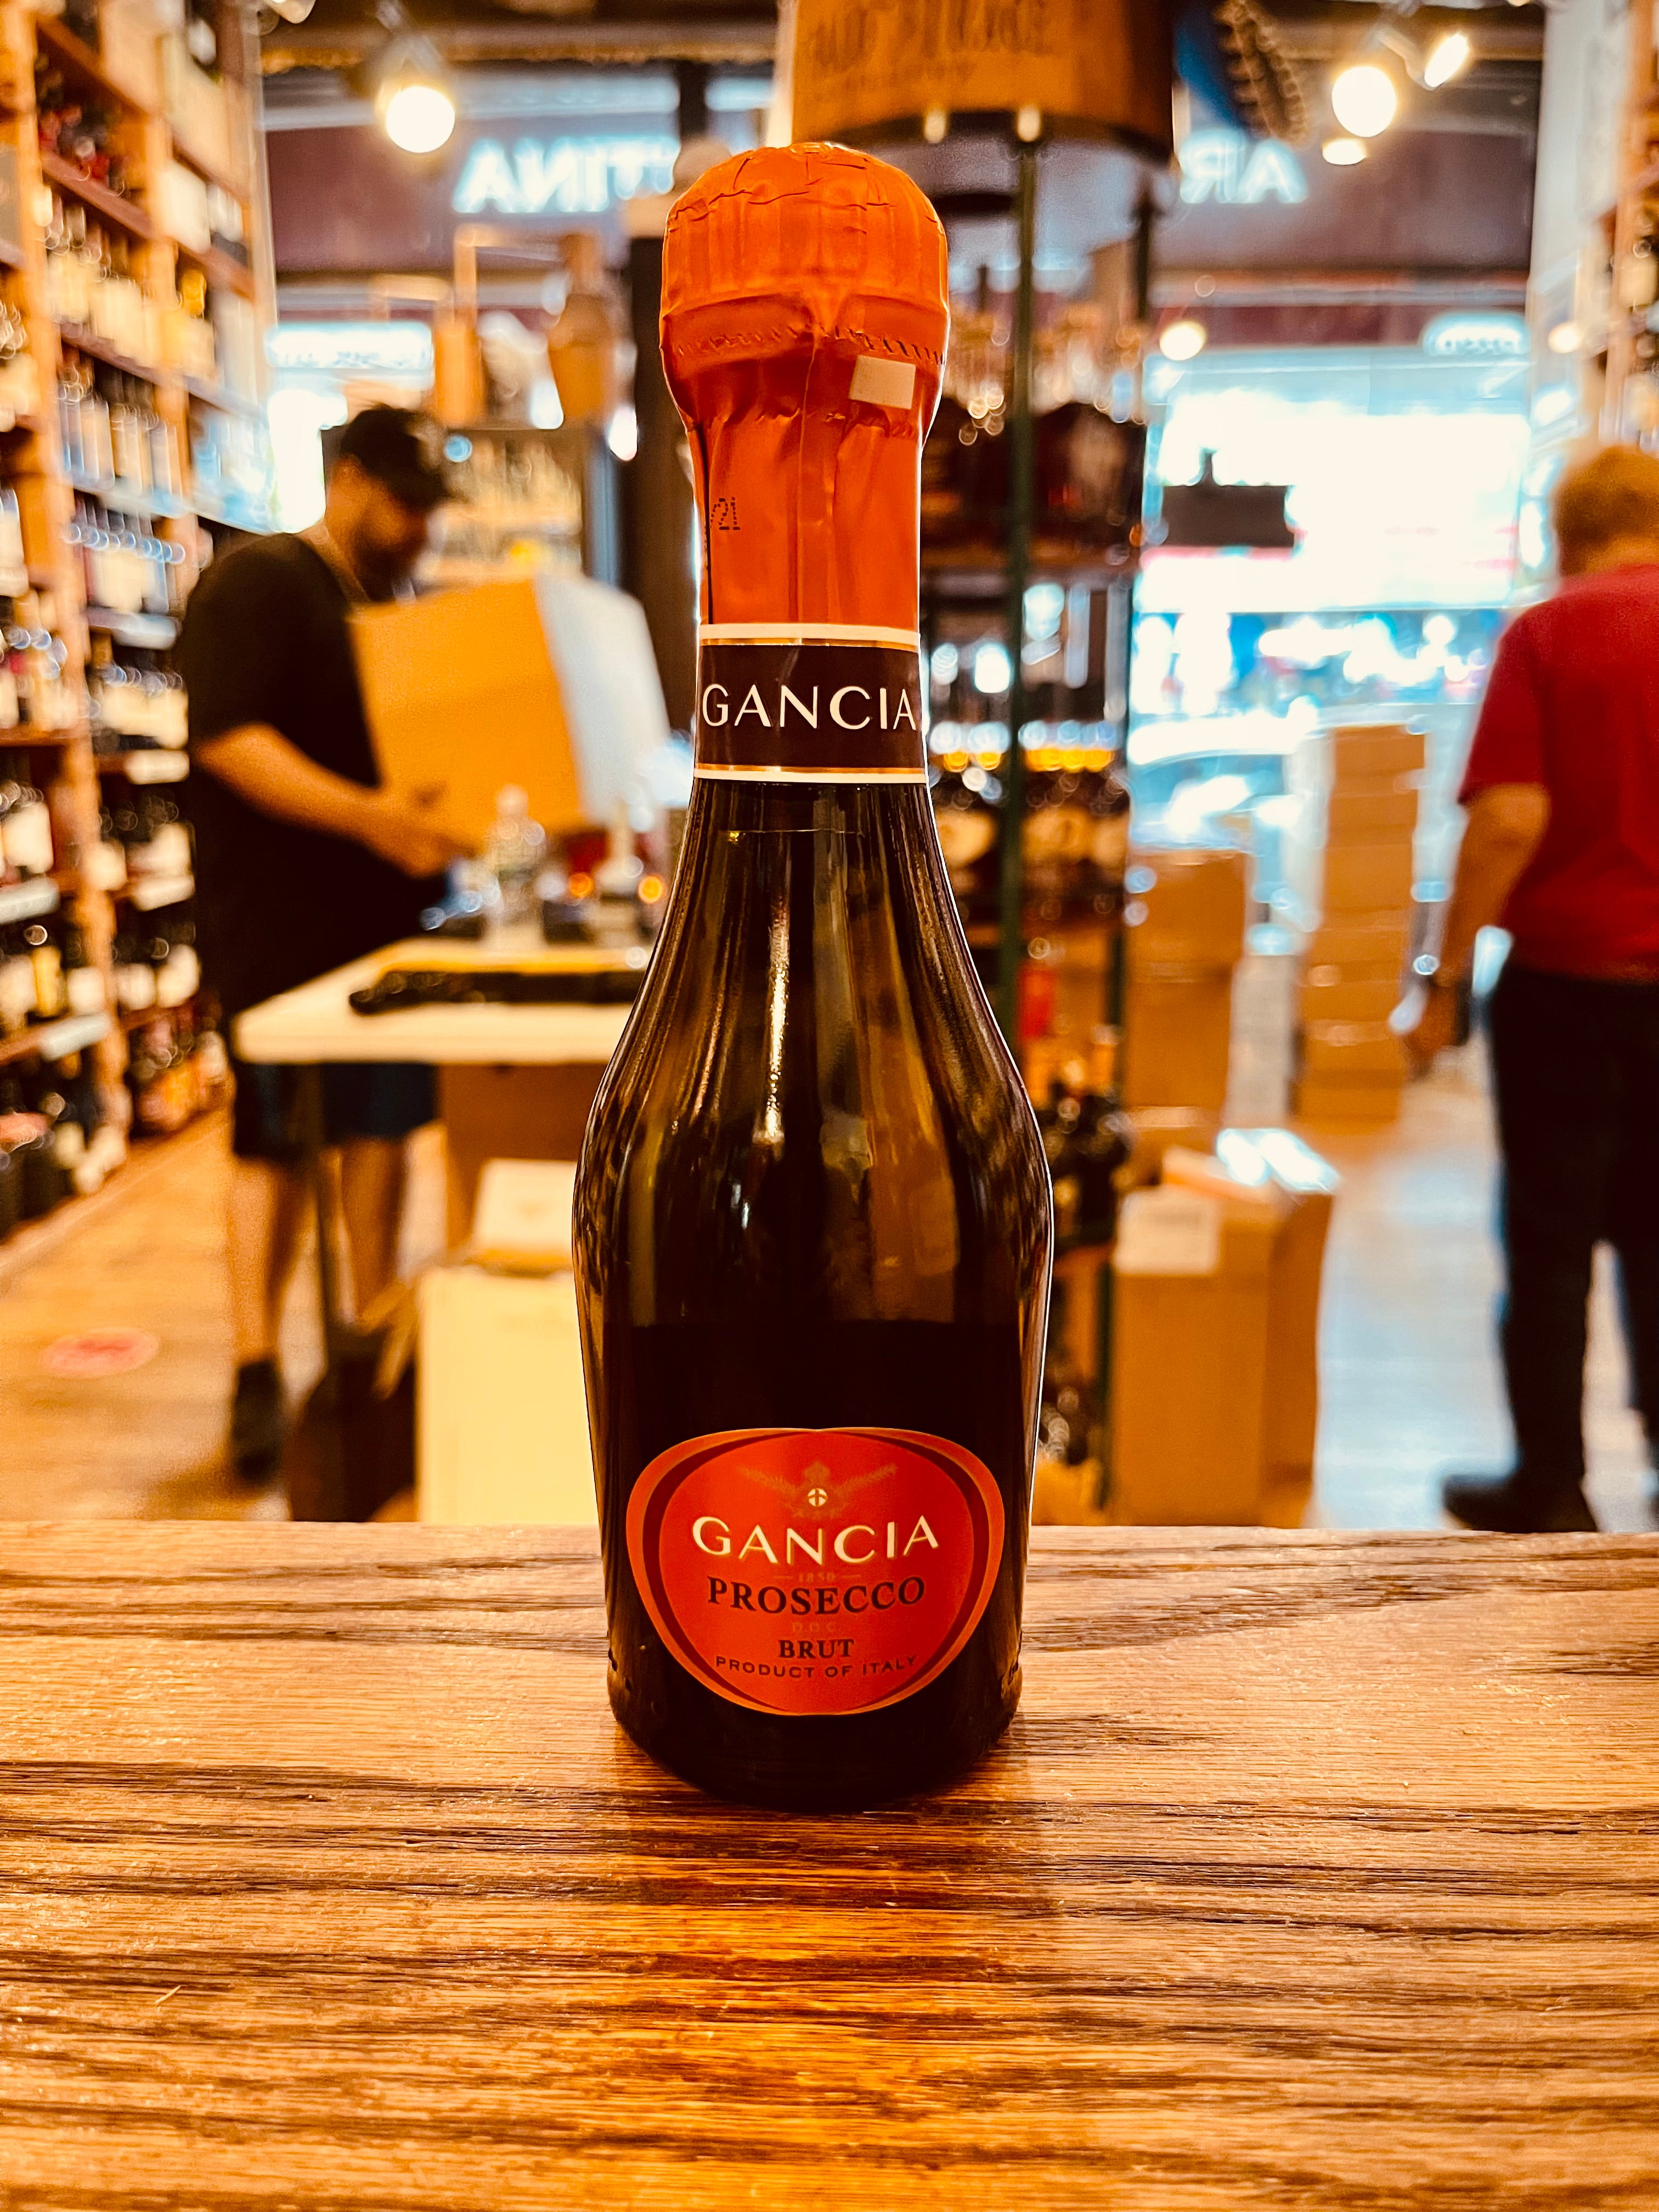 Gancia Prosecco 187mL small shapely dark bottle with an orange label and top